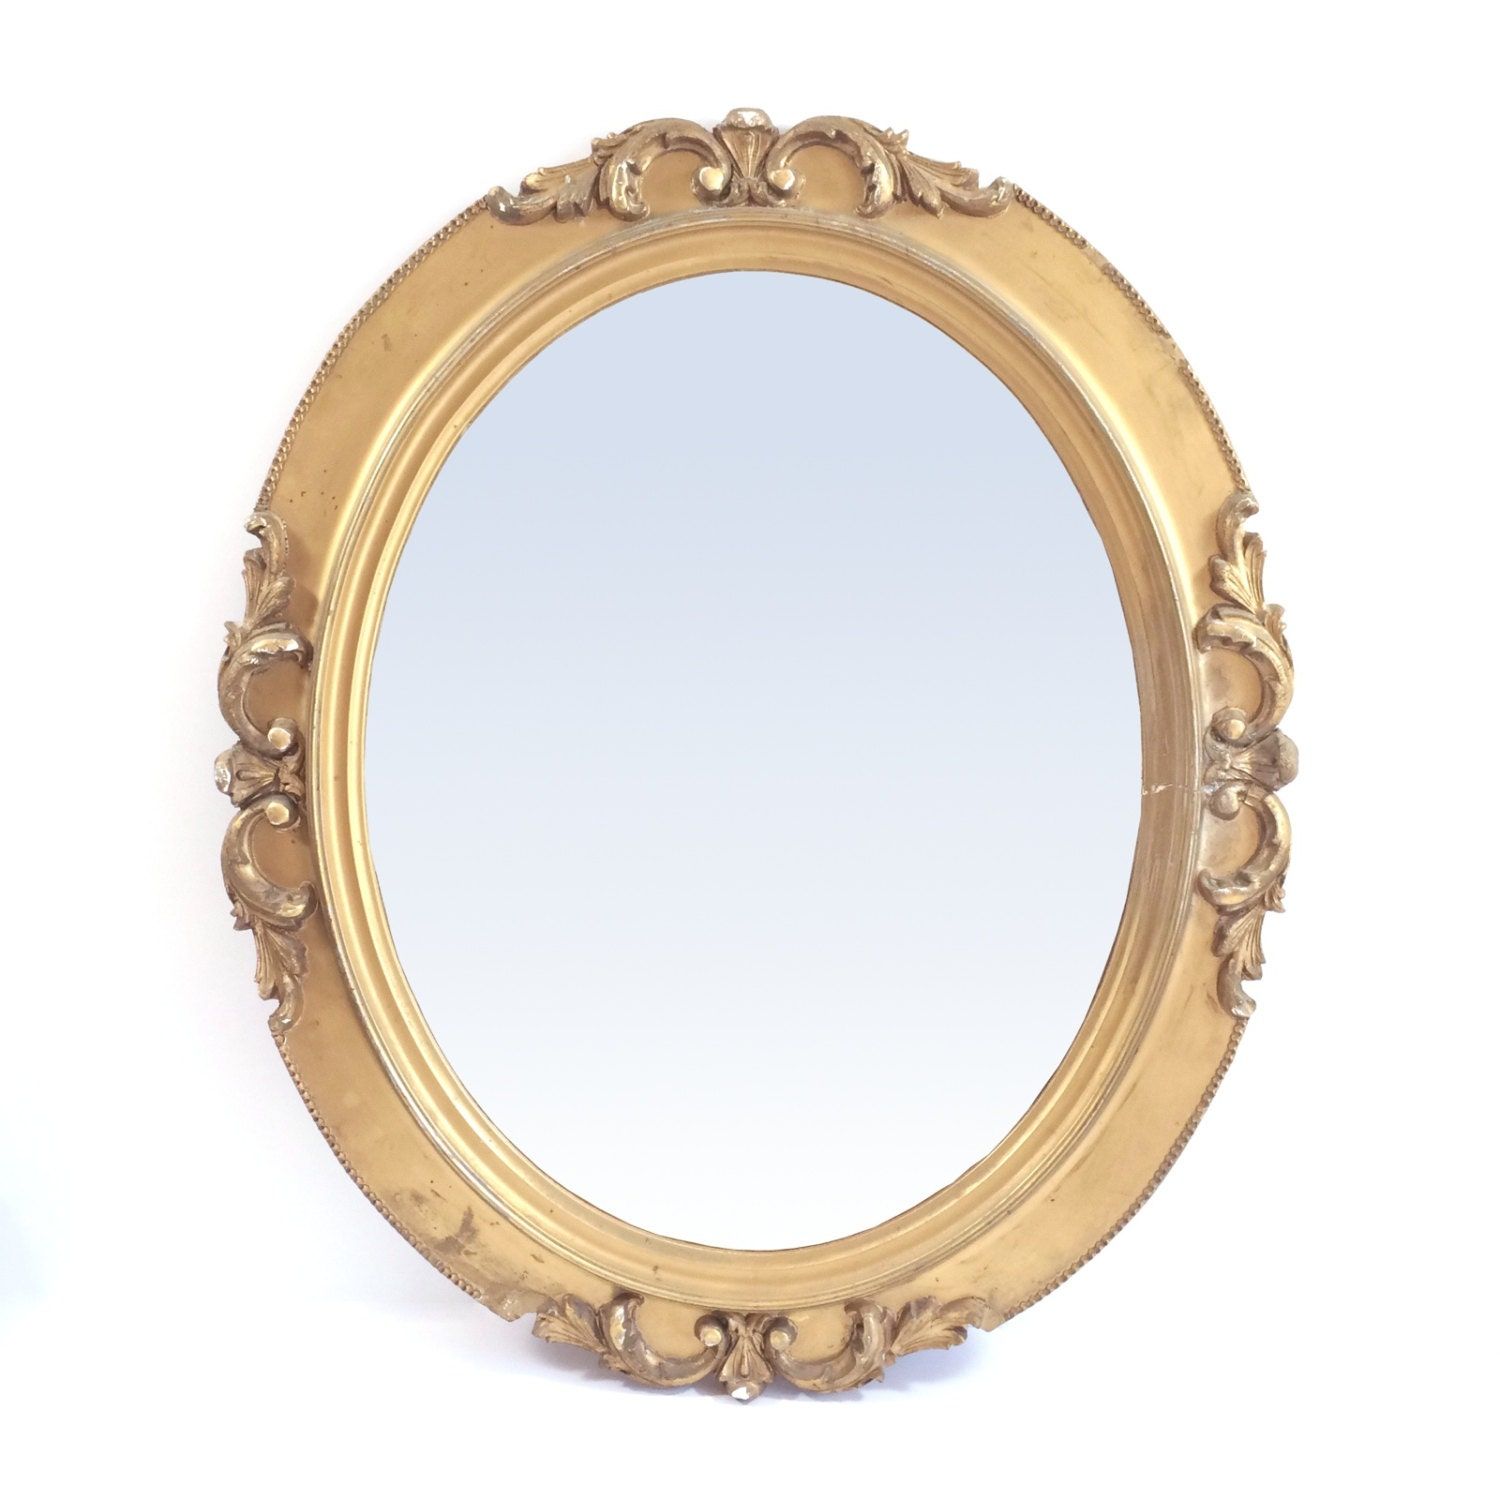 Vintage Gold Gilt Oval Wall Mirror In Wood Frame 25 By With Wooden Oval Wall Mirrors (View 1 of 15)